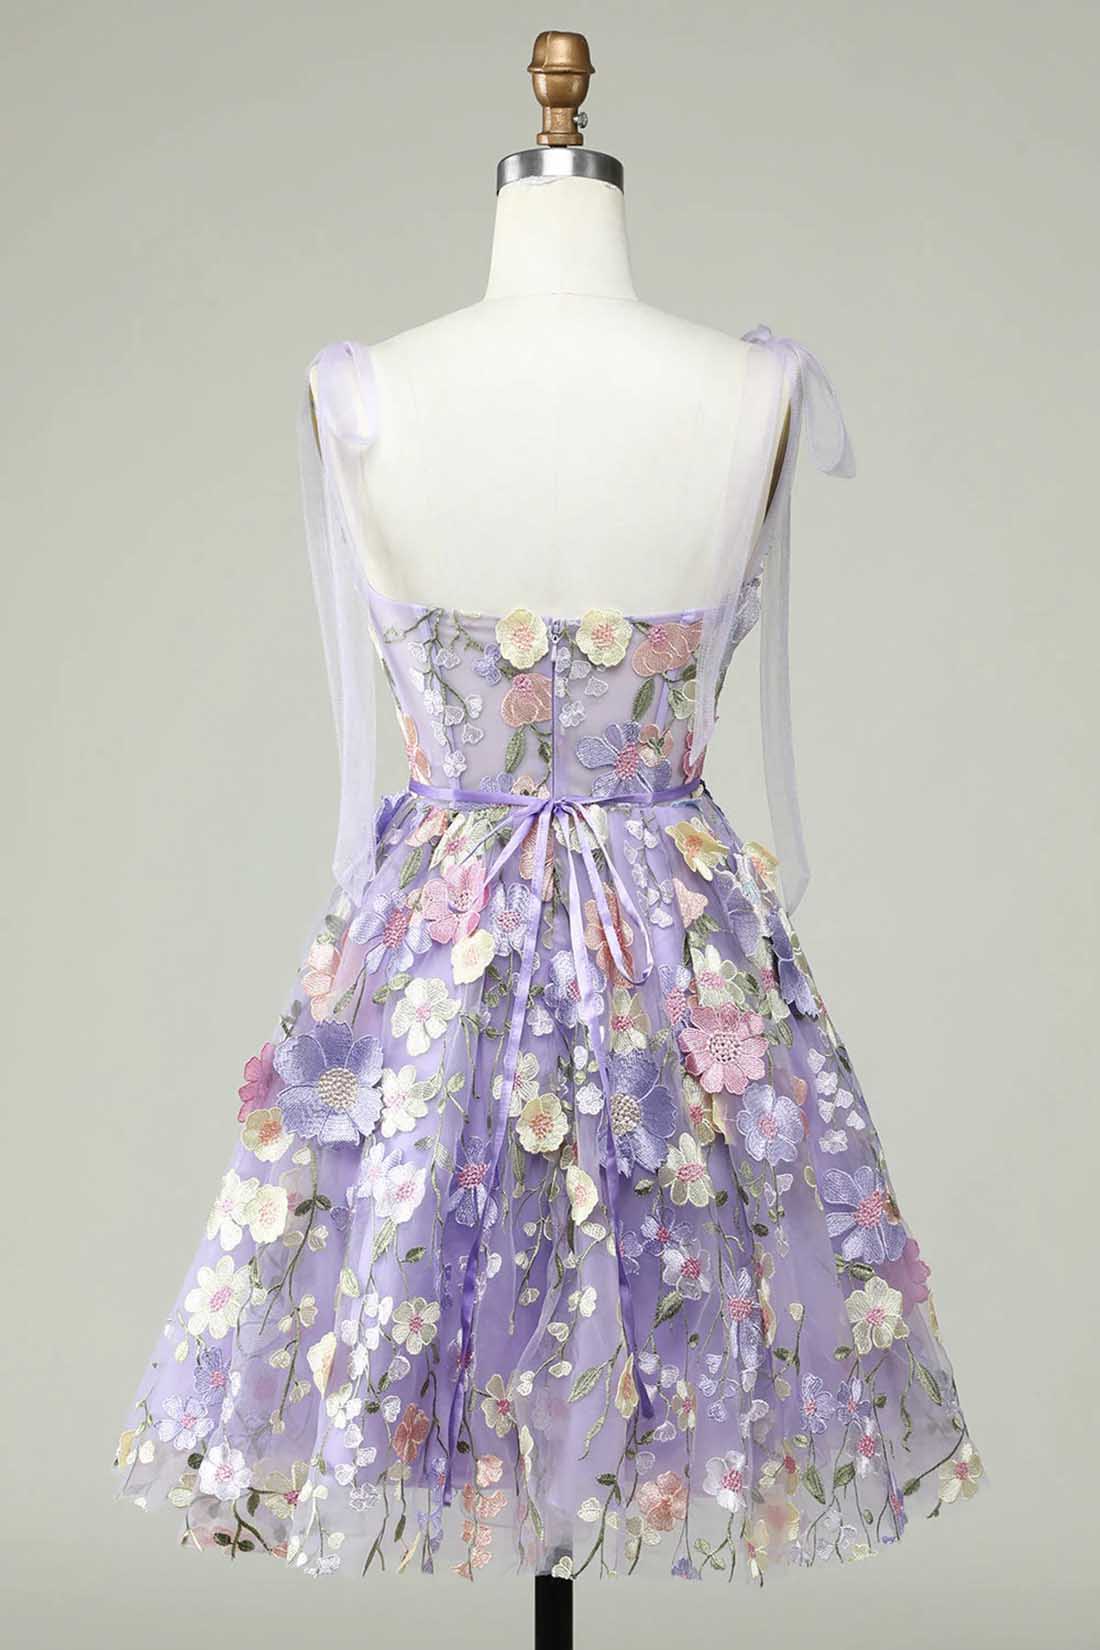 Lavender 3D Floral Embroidered Party Dress, Cute A-line Homecoming Dress